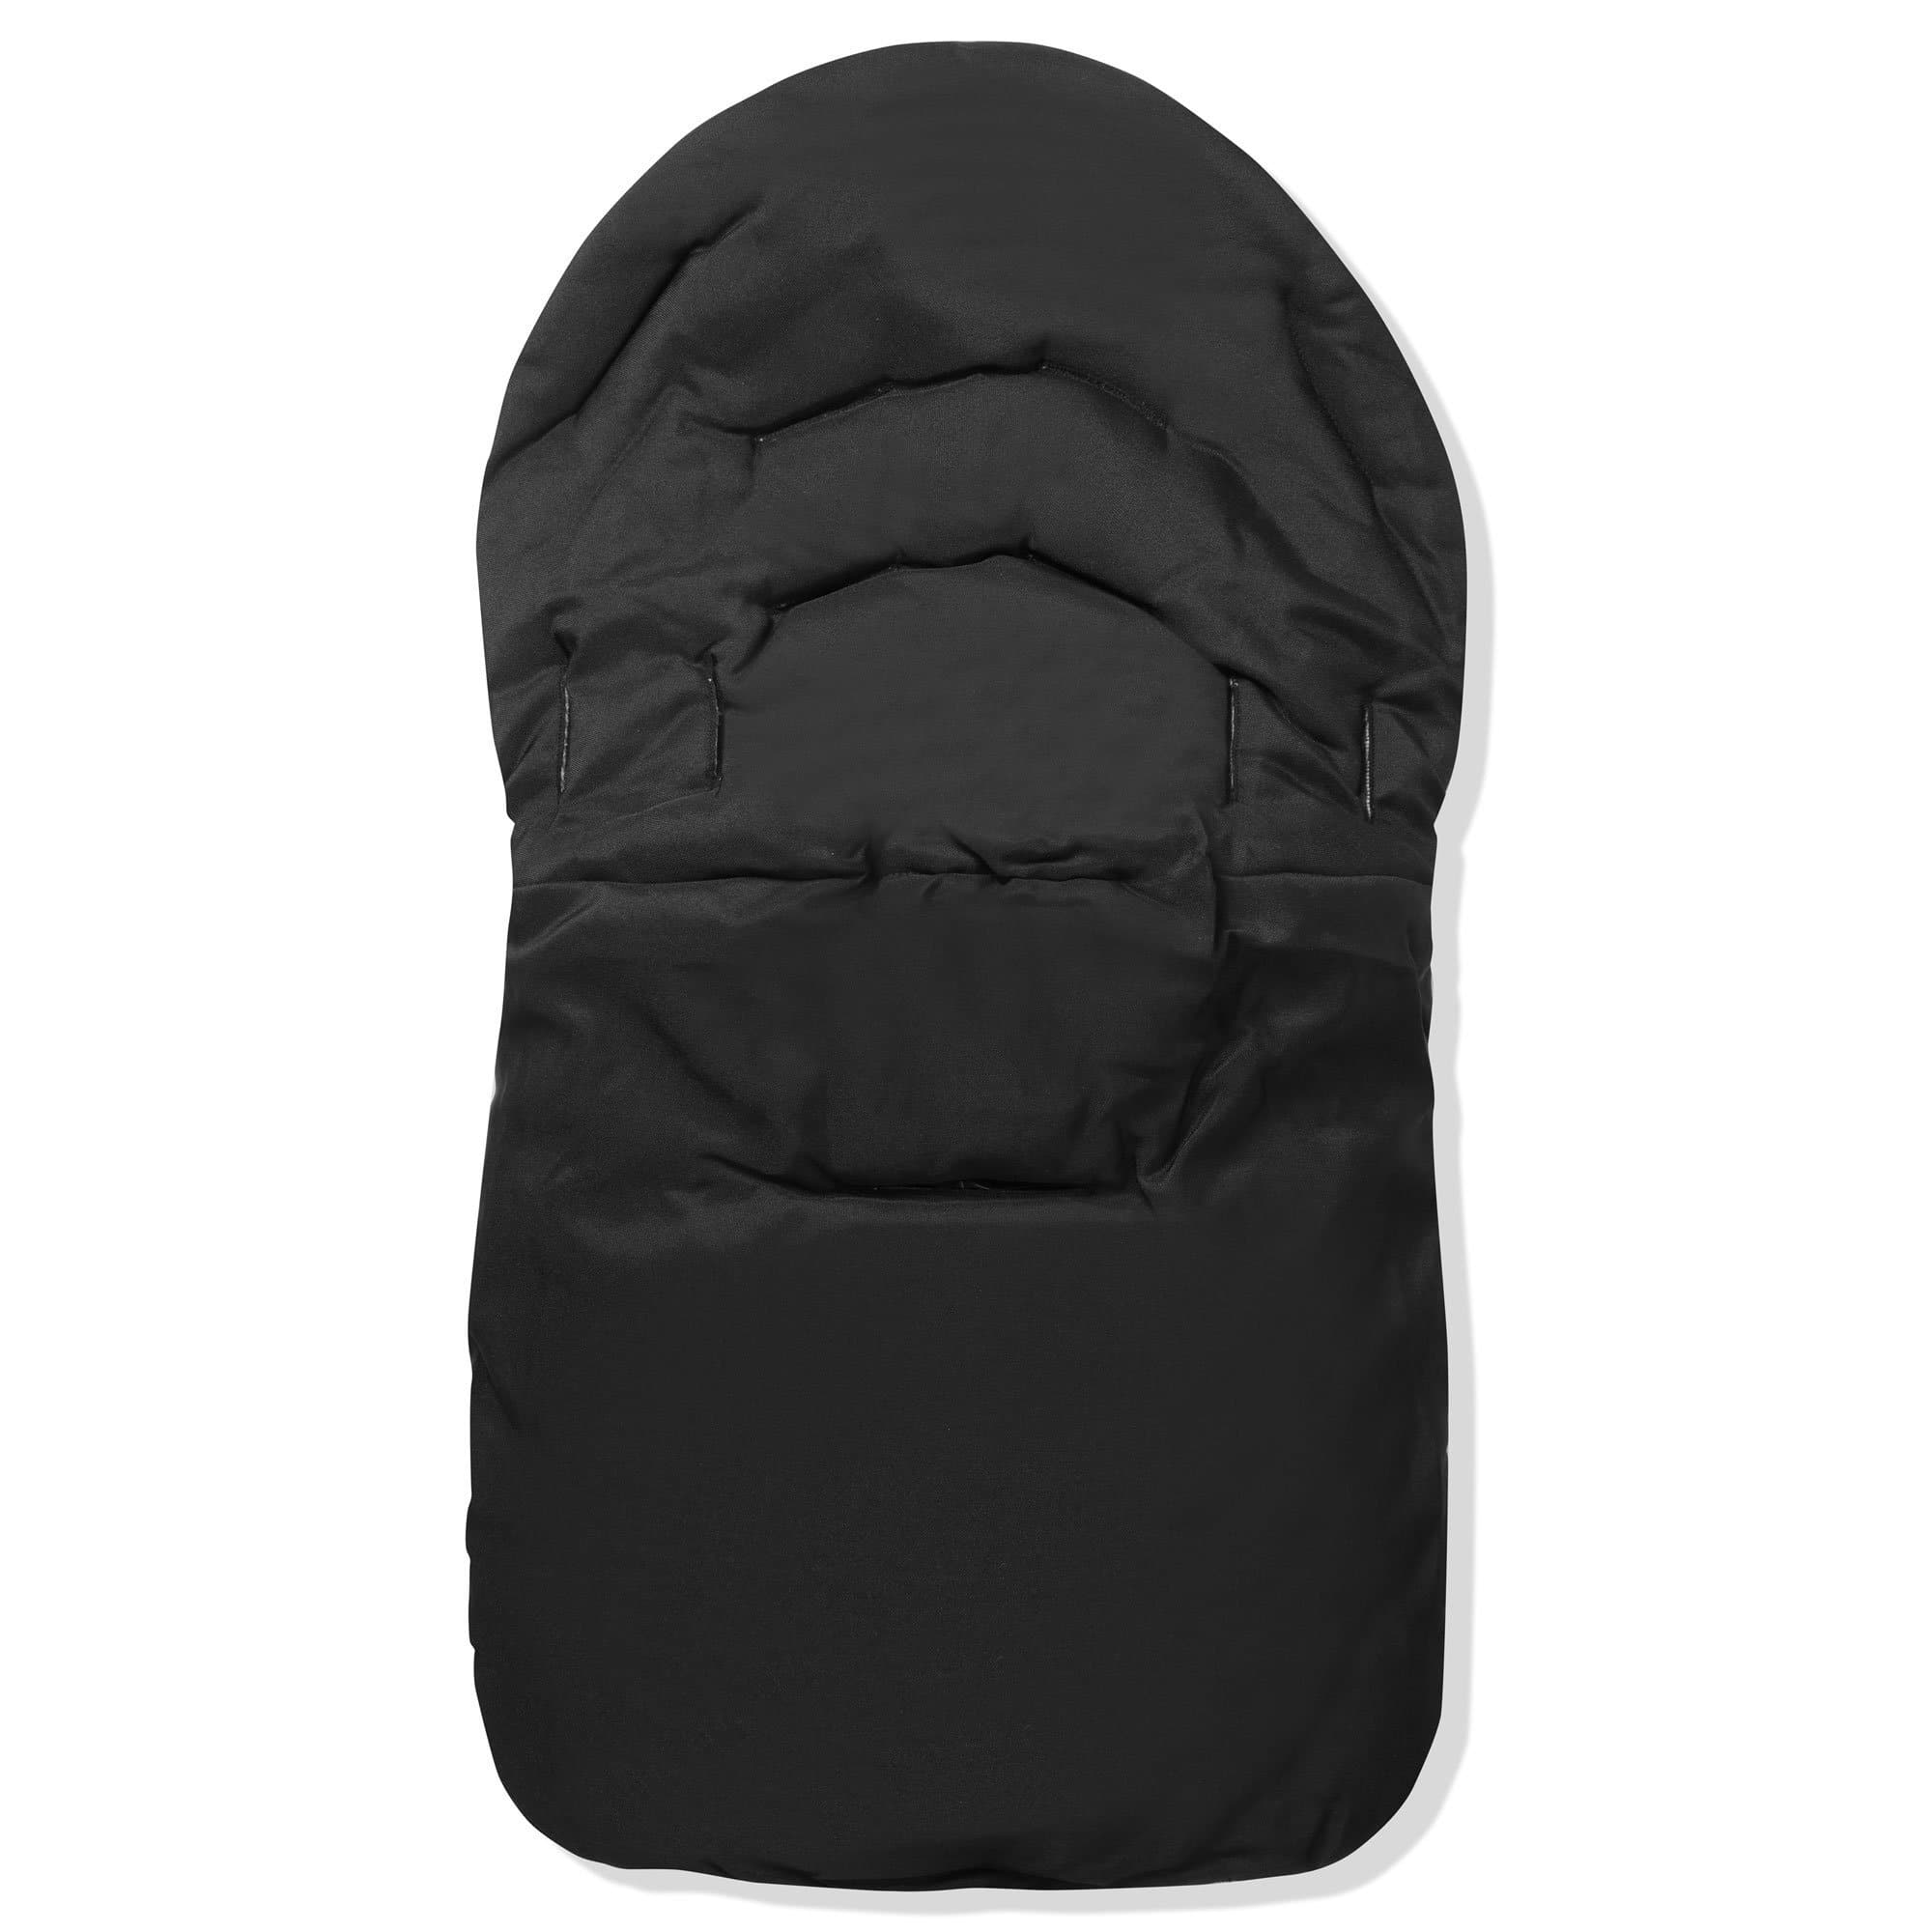 Car Seat Footmuff / Cosy Toes Compatible with Joie - For Your Little One